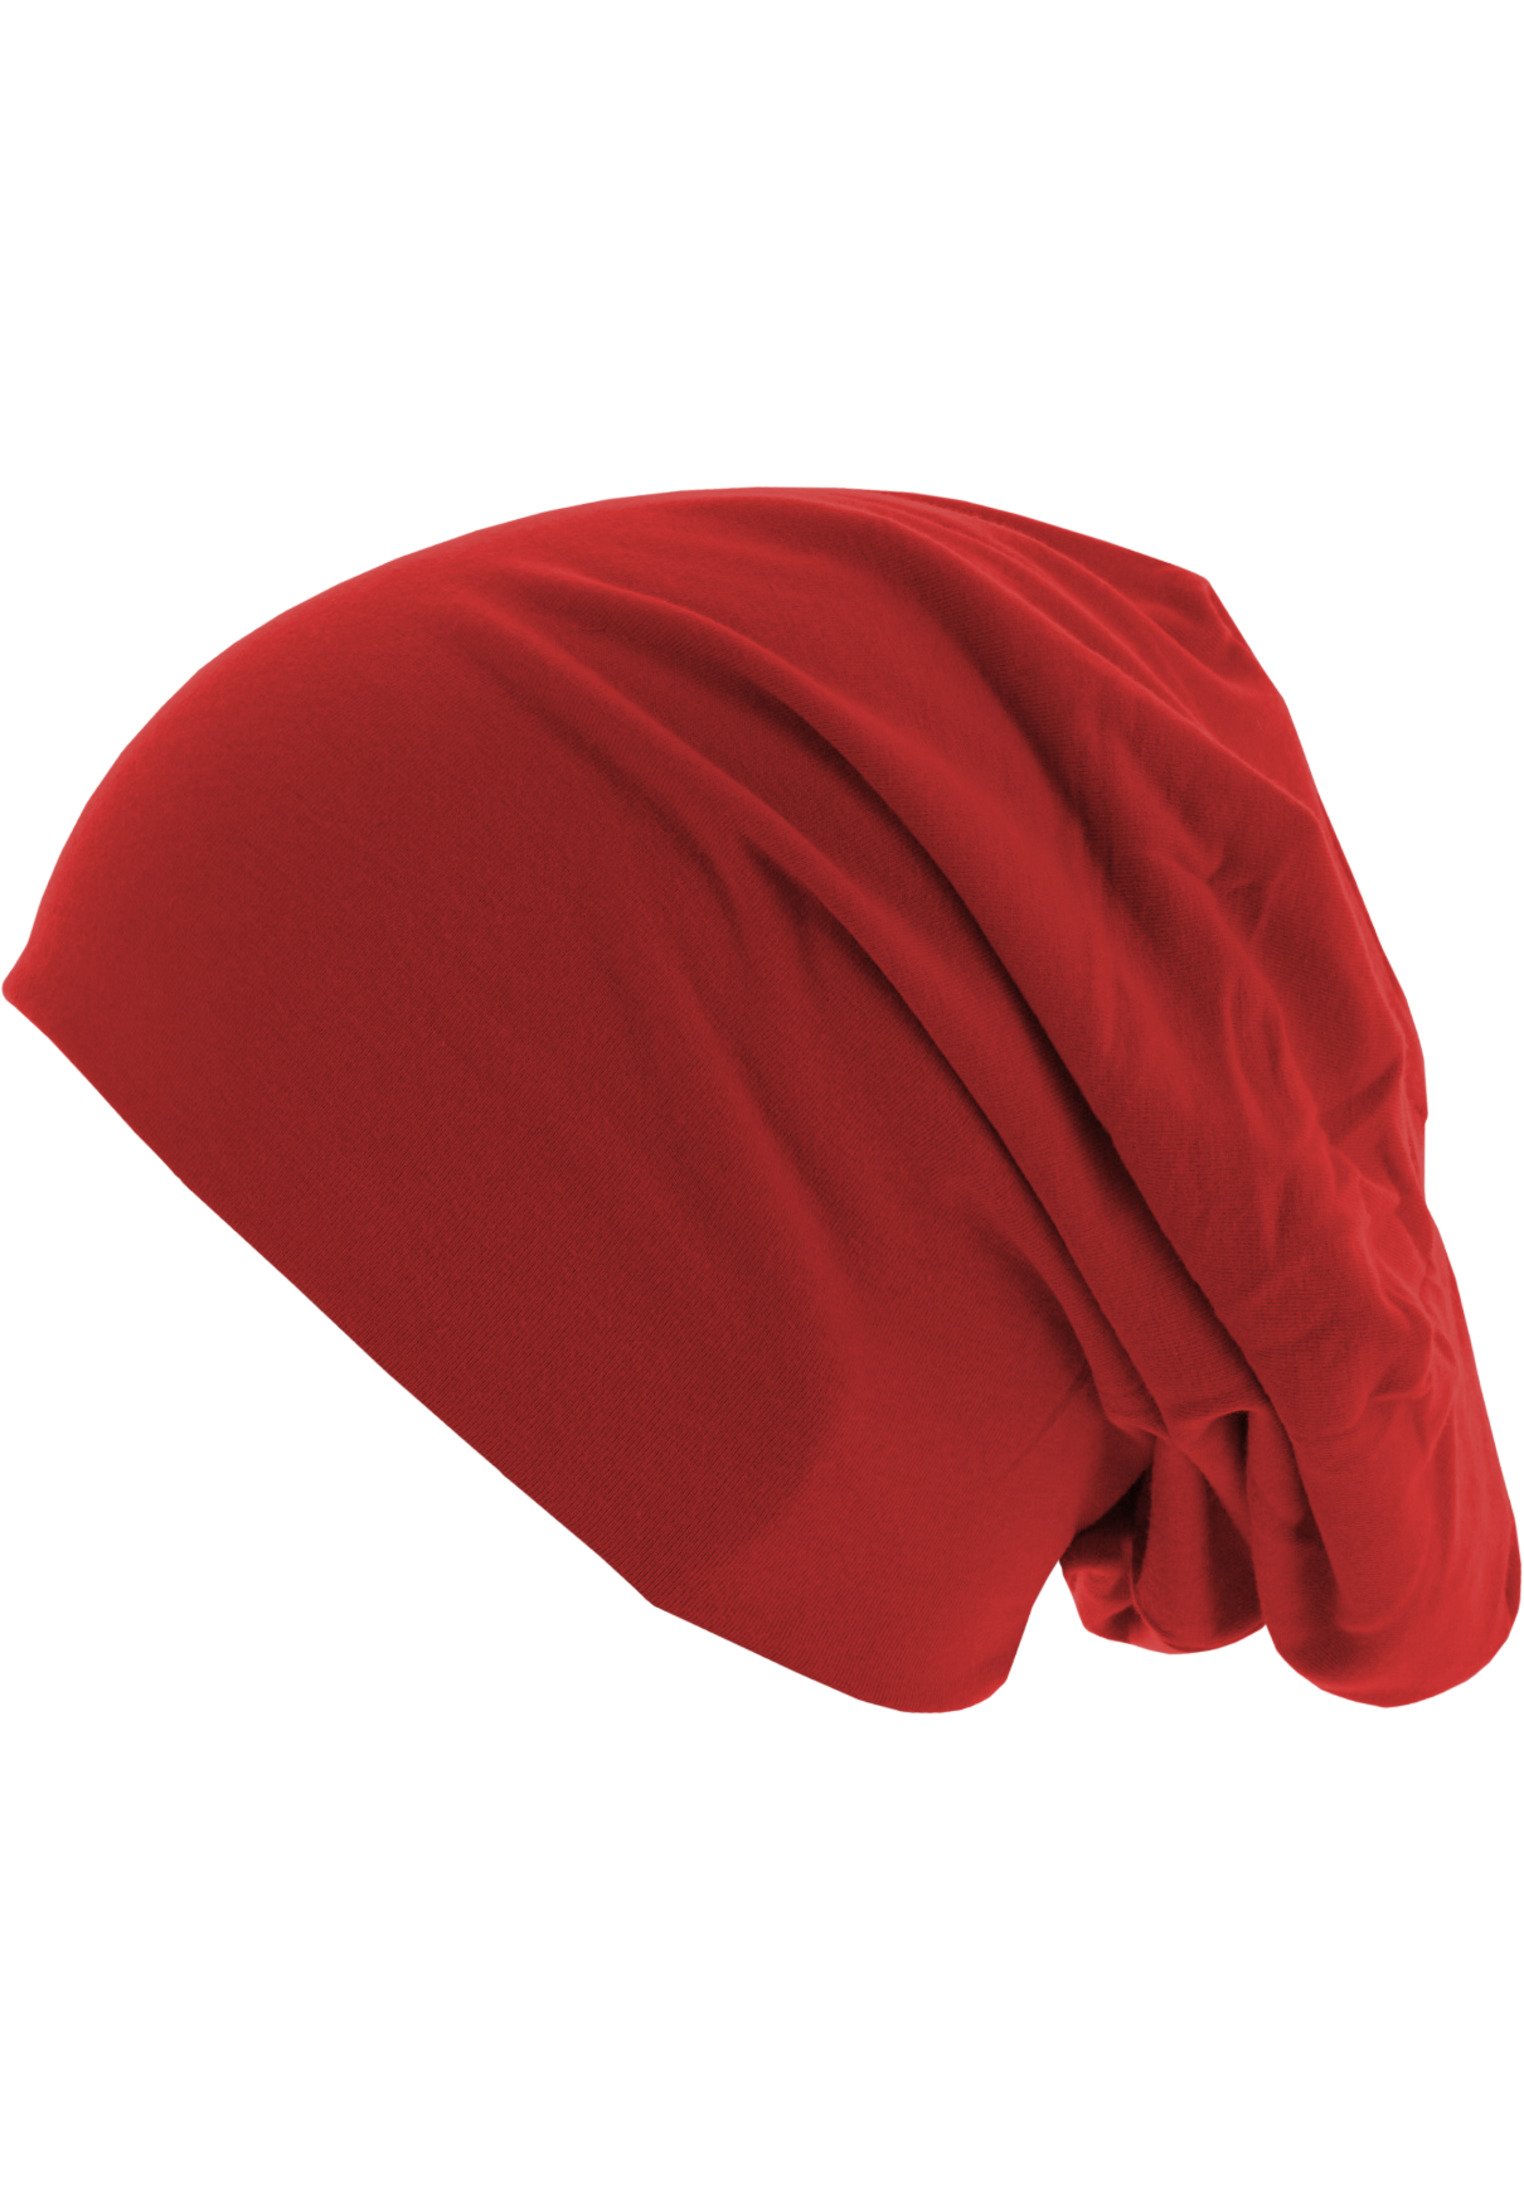 Jersey Beanie MSTRDS red one size